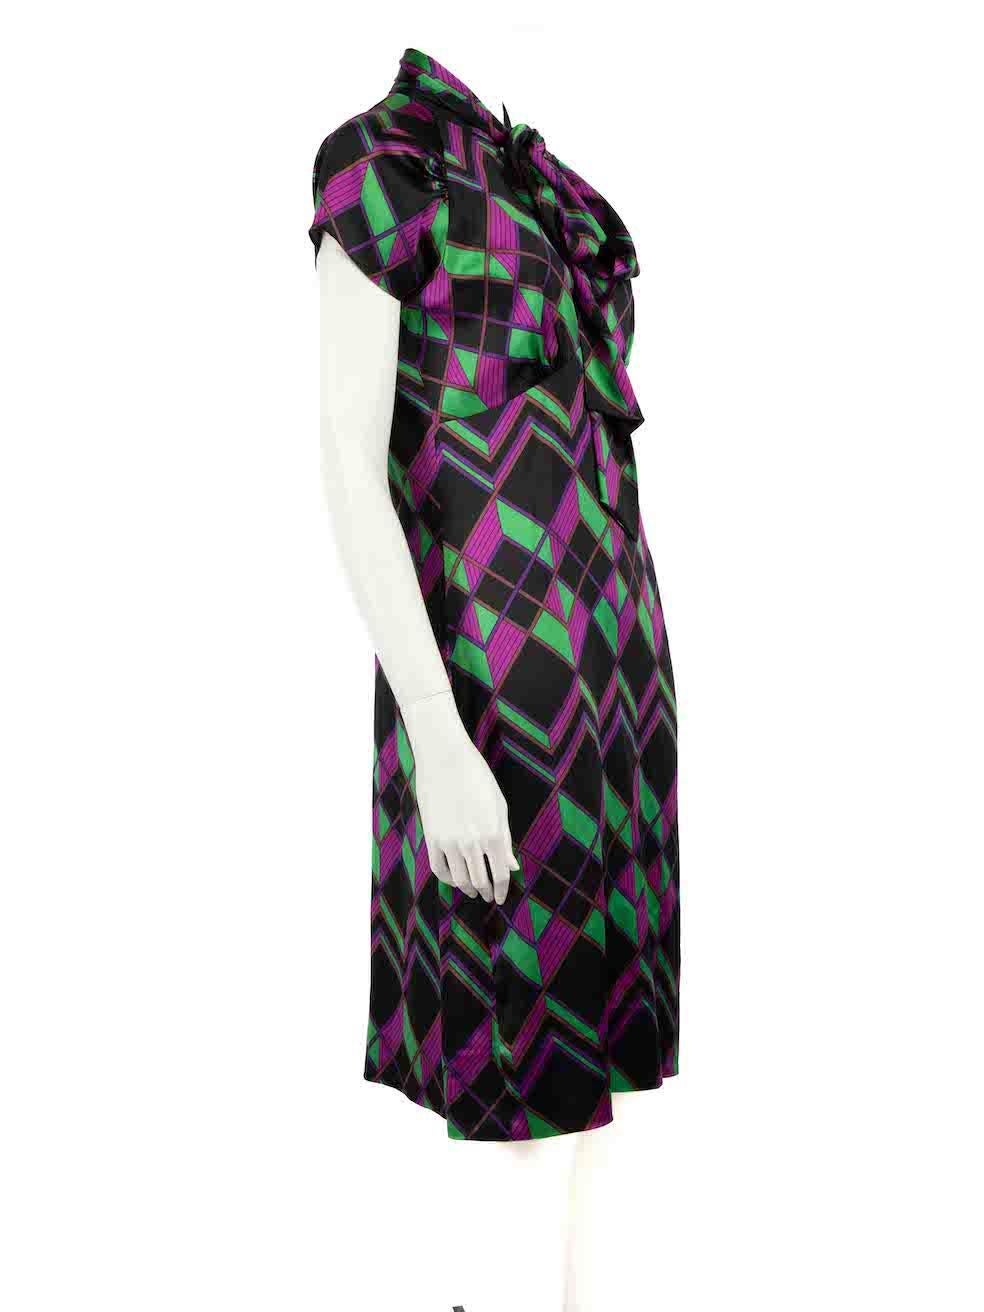 CONDITION is Never worn, with tags. No visible wear to dress is evident on this new Diane Von Furstenberg designer resale item.
 
 
 
 Details
 
 
 Multicoloured
 
 Silk
 
 Dress
 
 Geometric print
 
 Short sleeves
 
 Midi
 
 Neck tie straps
 
 
 
